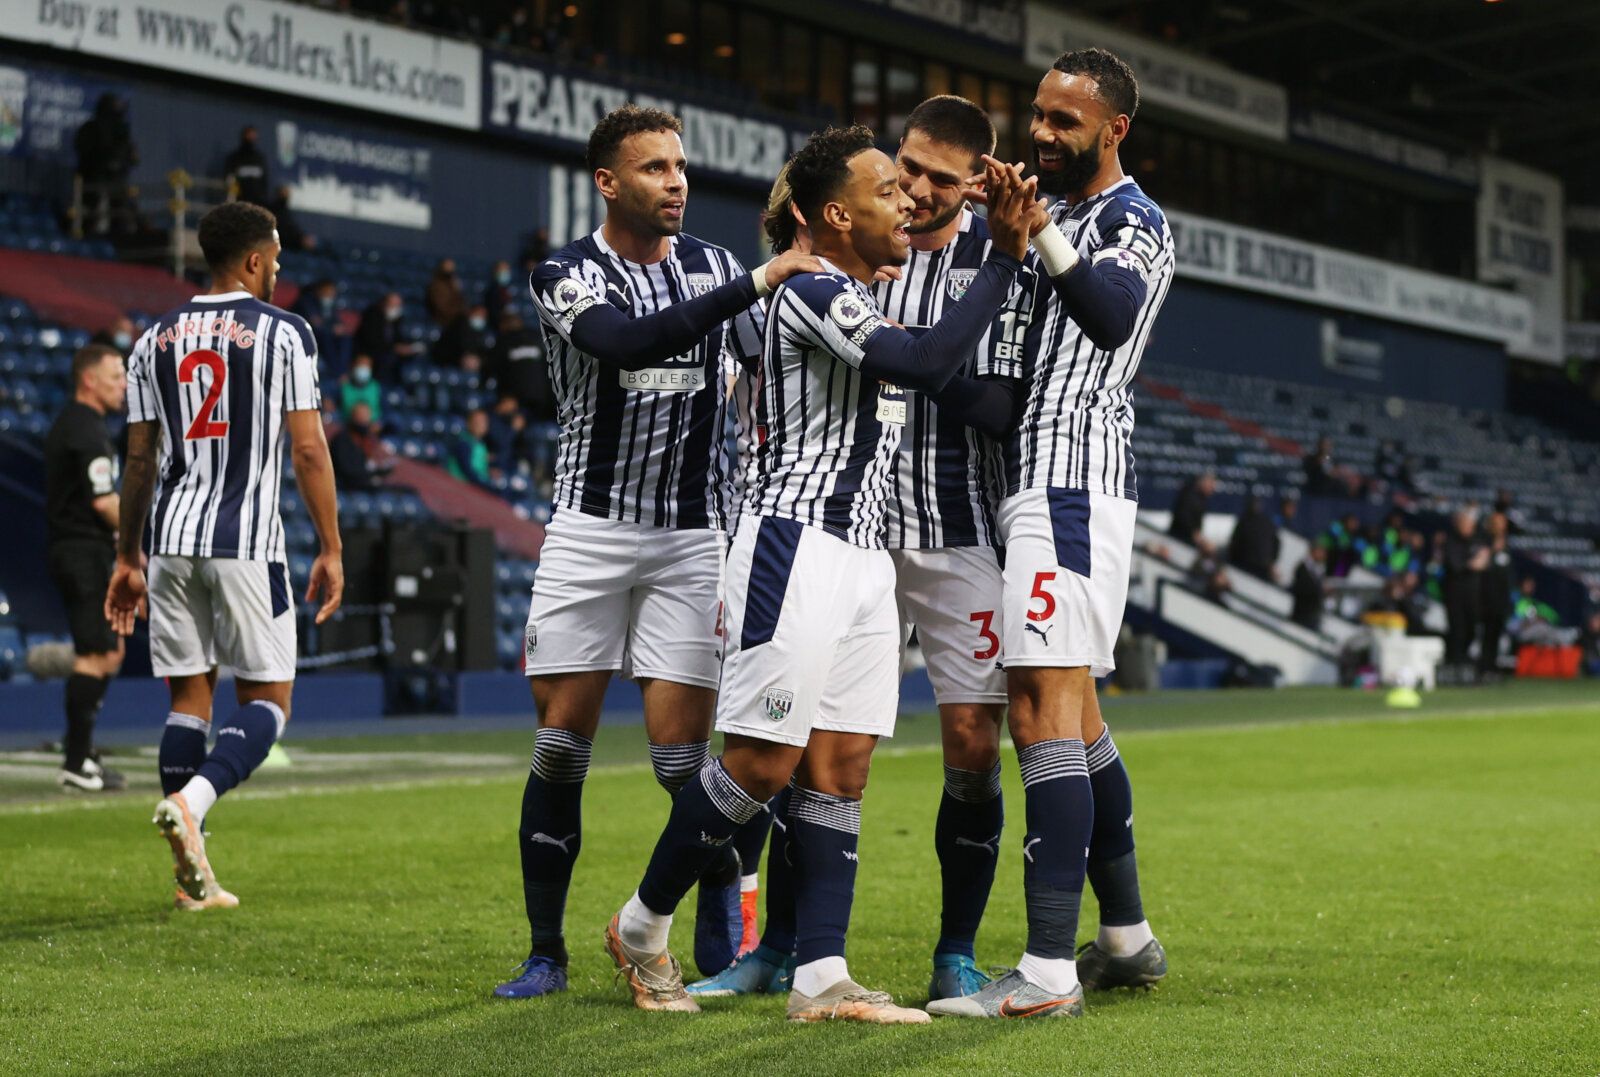 Soccer Football - Premier League - West Bromwich Albion v West Ham United - The Hawthorns, West Bromwich, Britain - May 19, 2021 West Bromwich Albion's Matheus Pereira celebrates their first goal with teammates, an own goal scored by West Ham United's Tomas Soucek Pool via REUTERS/Molly Darlington EDITORIAL USE ONLY. No use with unauthorized audio, video, data, fixture lists, club/league logos or 'live' services. Online in-match use limited to 75 images, no video emulation. No use in betting, ga